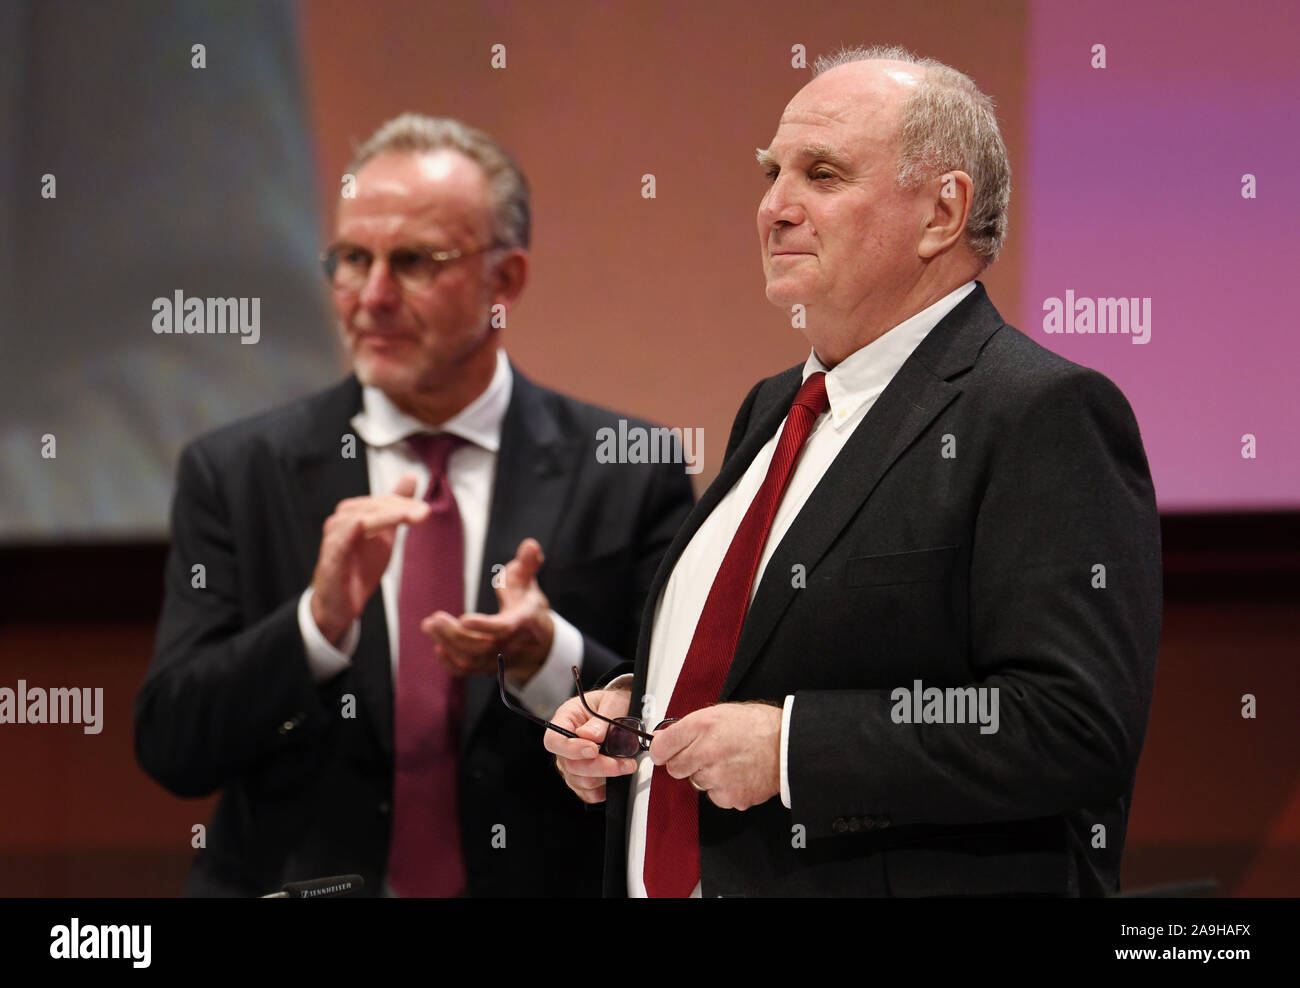 15 November 2019, Bavaria, Munich: Soccer: Bundesliga, Annual General Meeting FC Bayern Munich in the Olympiahalle. Uli Hoeneß (r), President of FC Bayern, receives applause from Karl-Heinz Rummenigge (l), Chairman of the Board of FC Bayern München AG. Photo: Tobias Hase/dpa Stock Photo